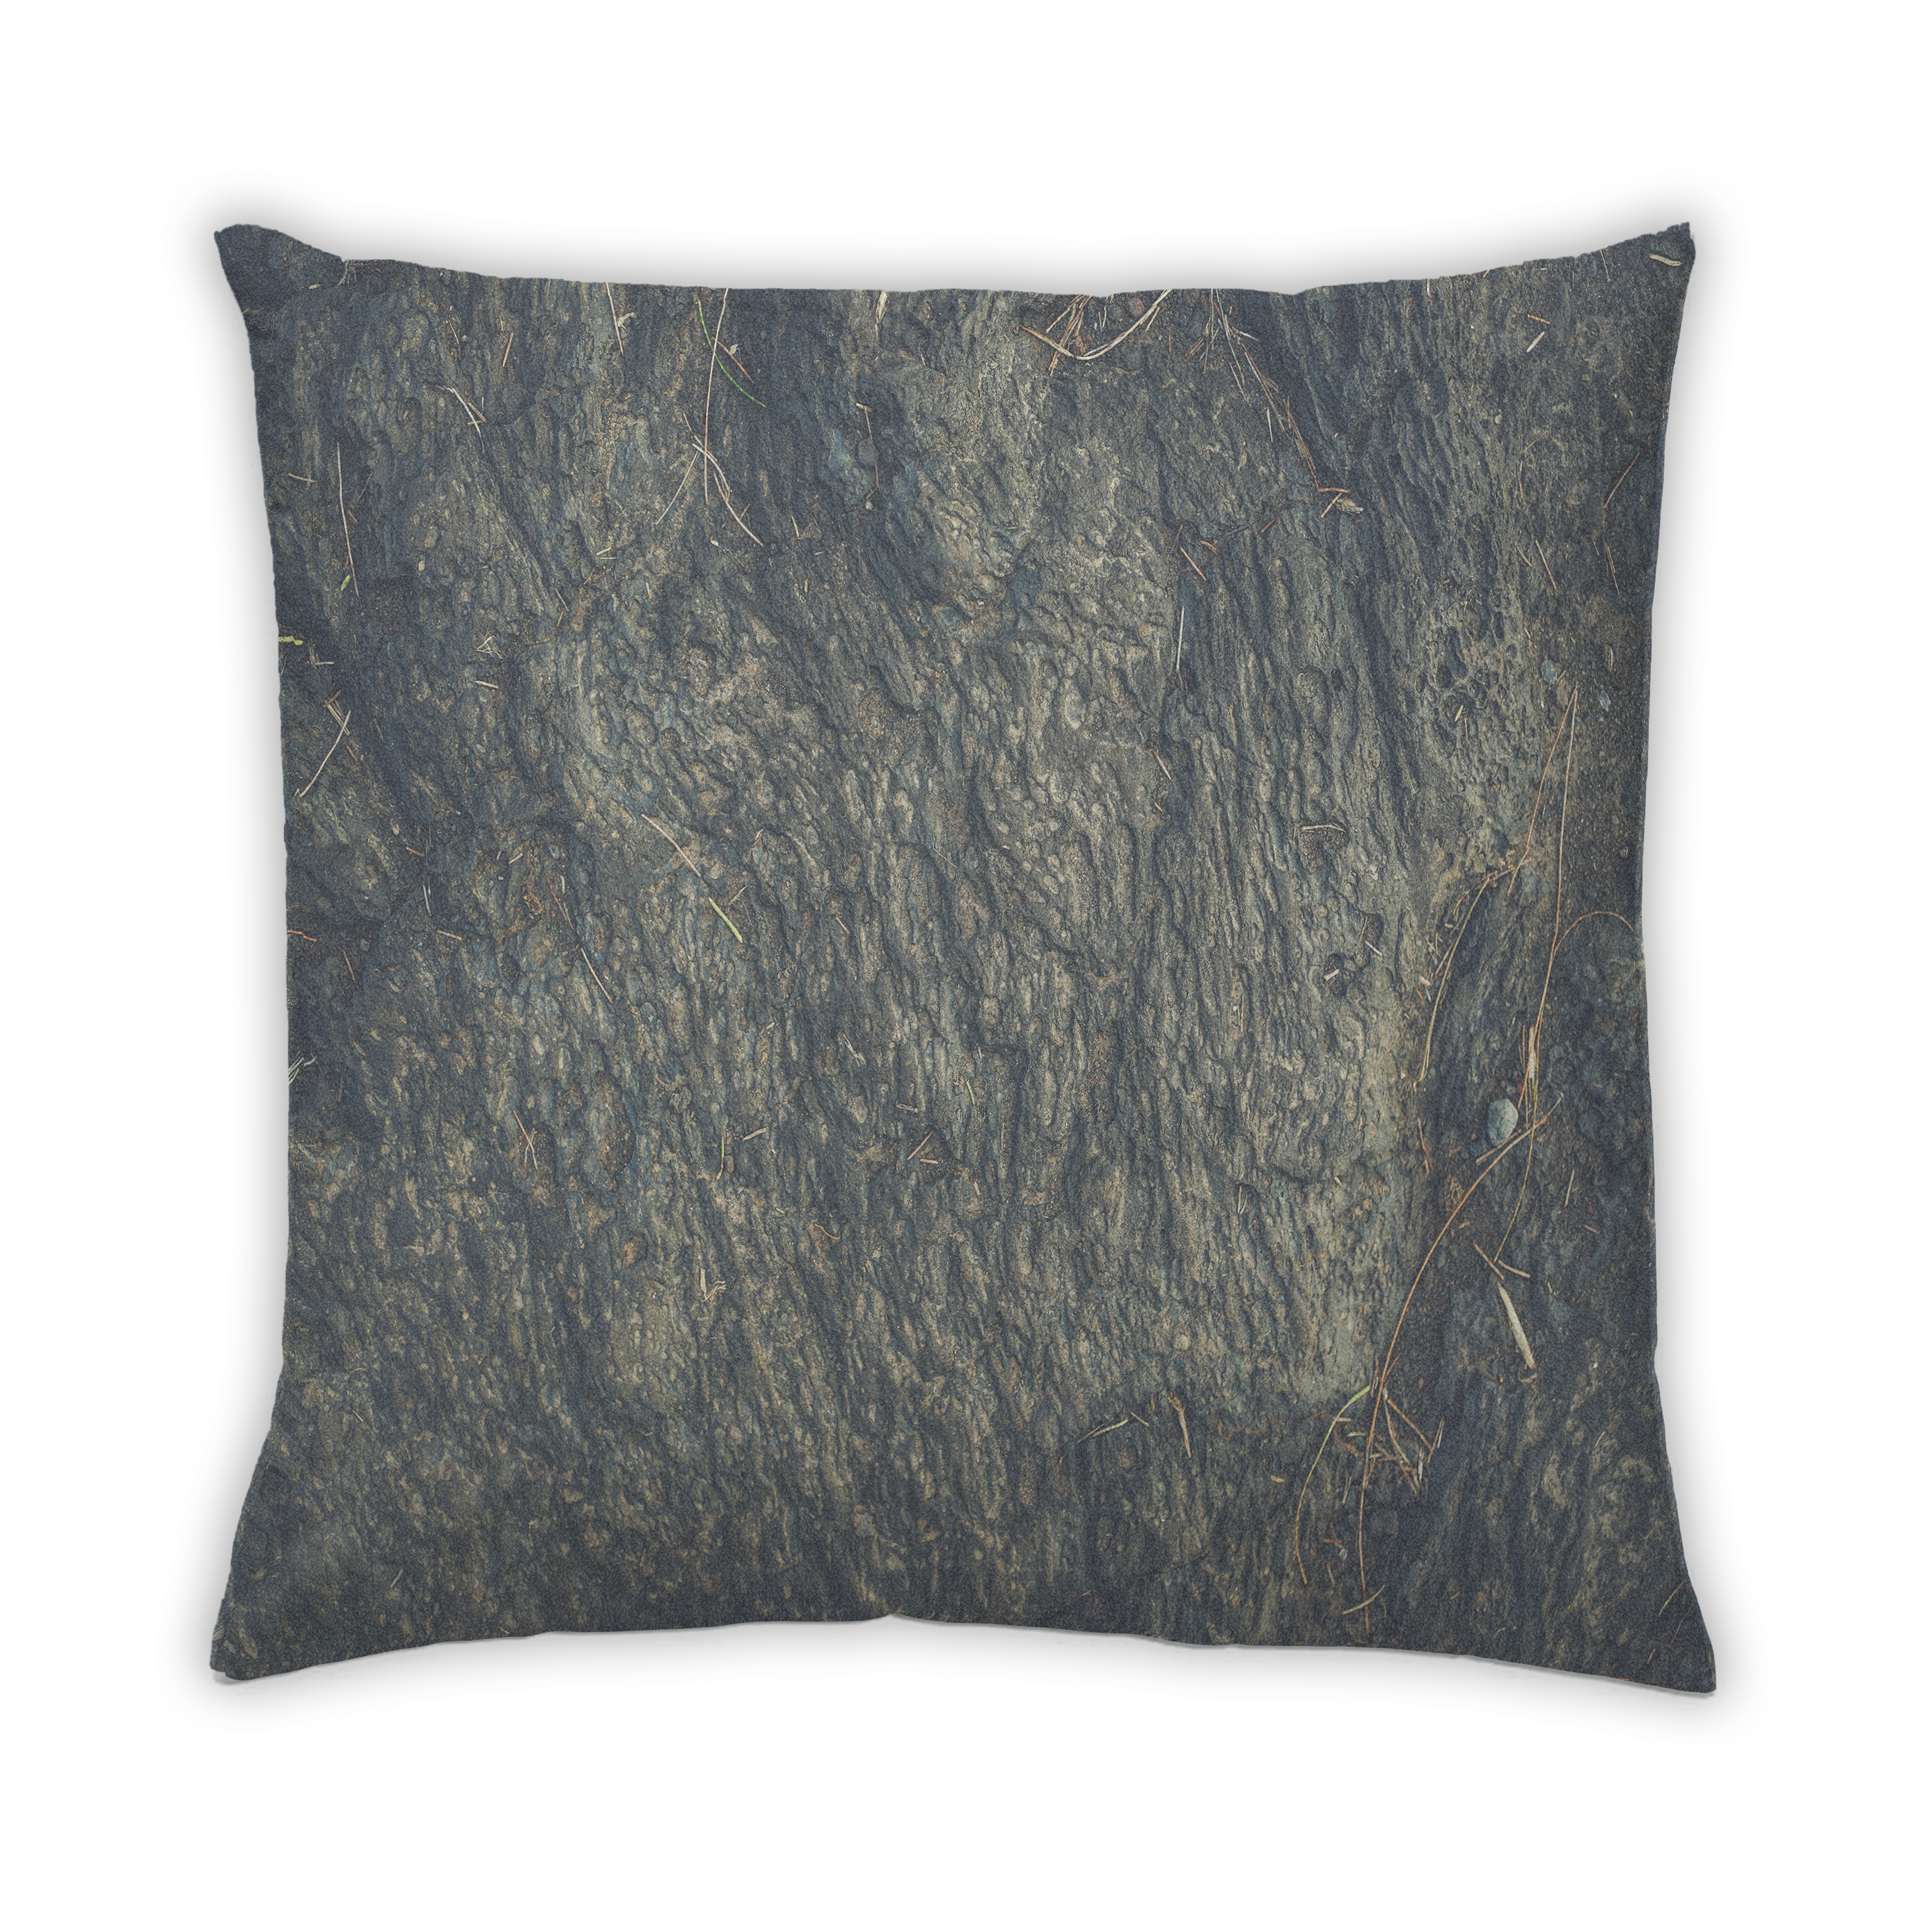 Ahgly Company Earth Rock Outdoor Throw Pillow, 18 inch by 18 inch - image 2 of 6